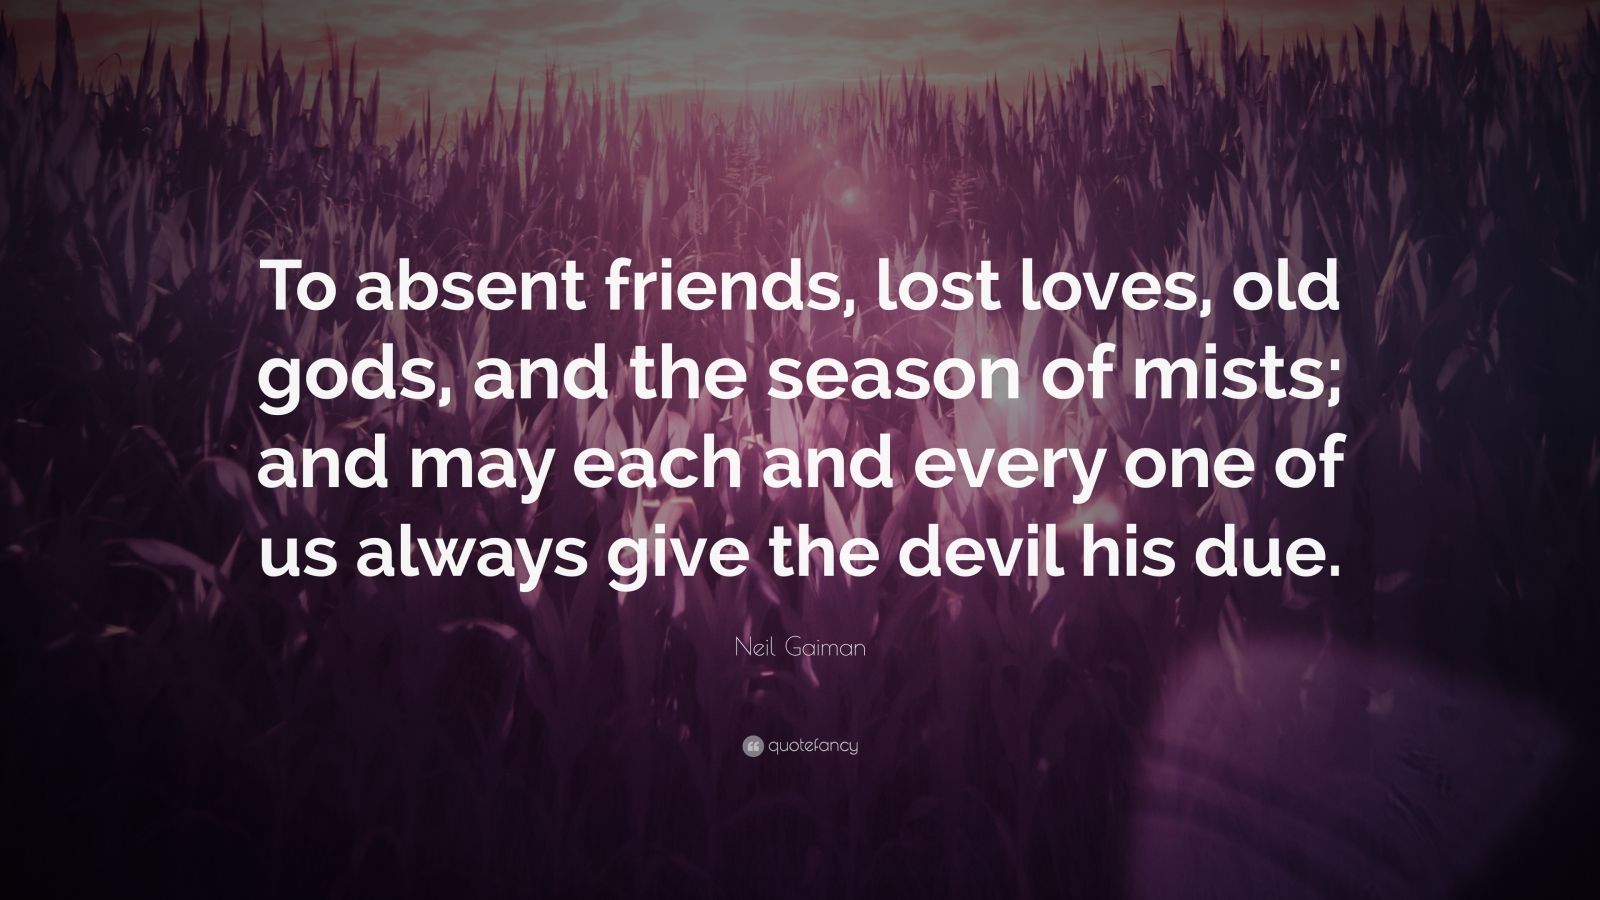 Neil Gaiman Quote: “To absent friends, lost loves, old gods, and the ...